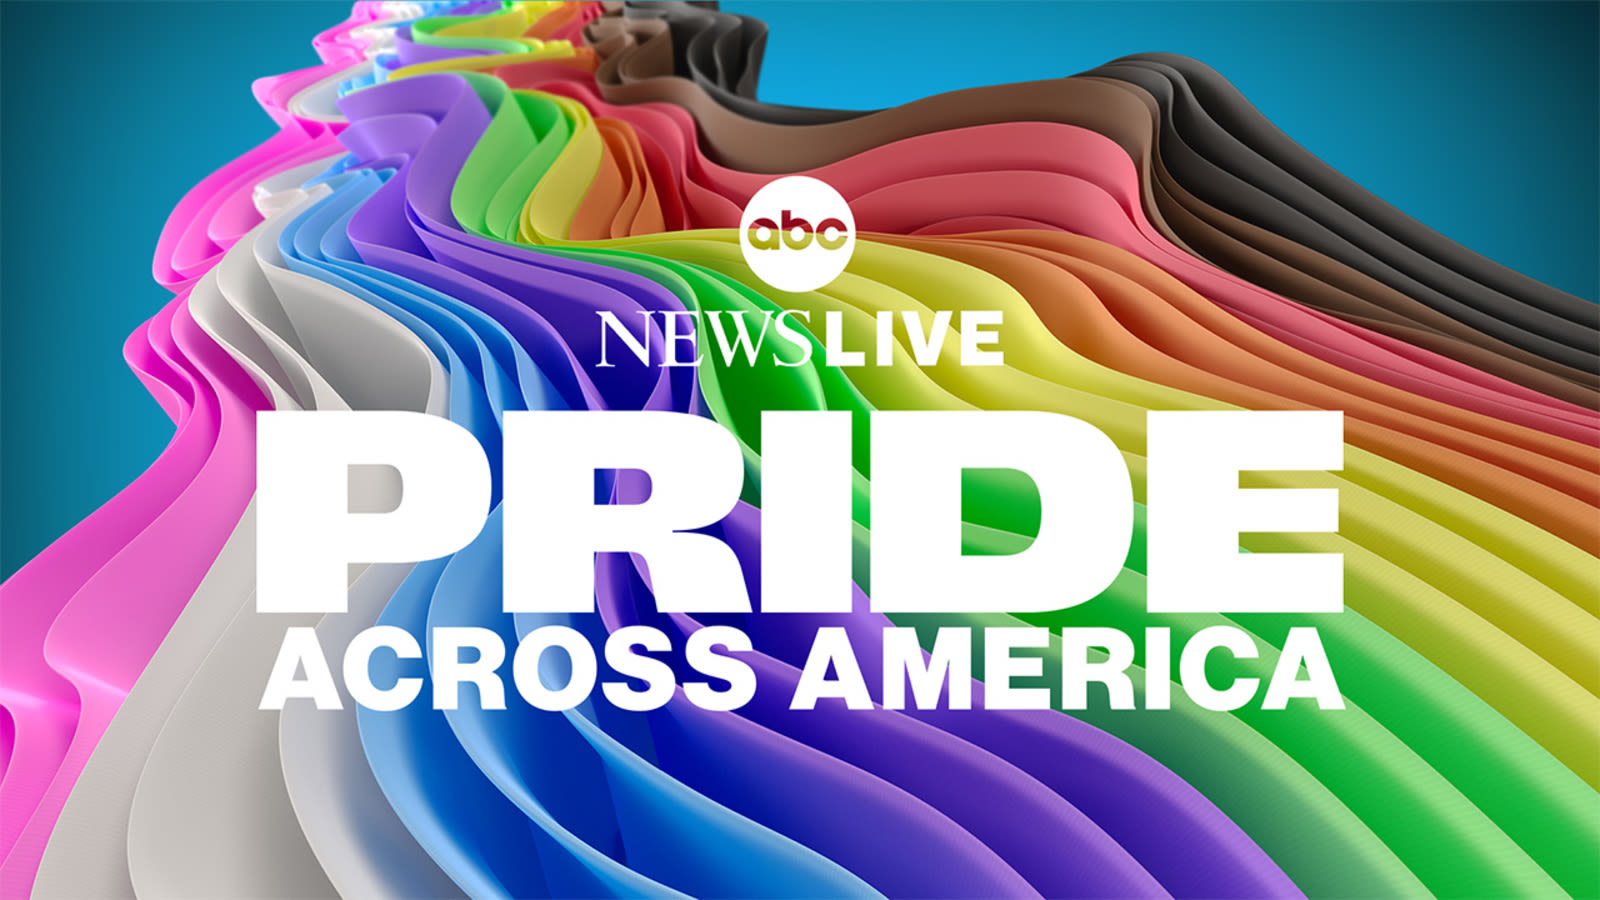 Watch ABC News Live's 'Pride Across America' featuring nation's largest LGBTQ+ parades, marches